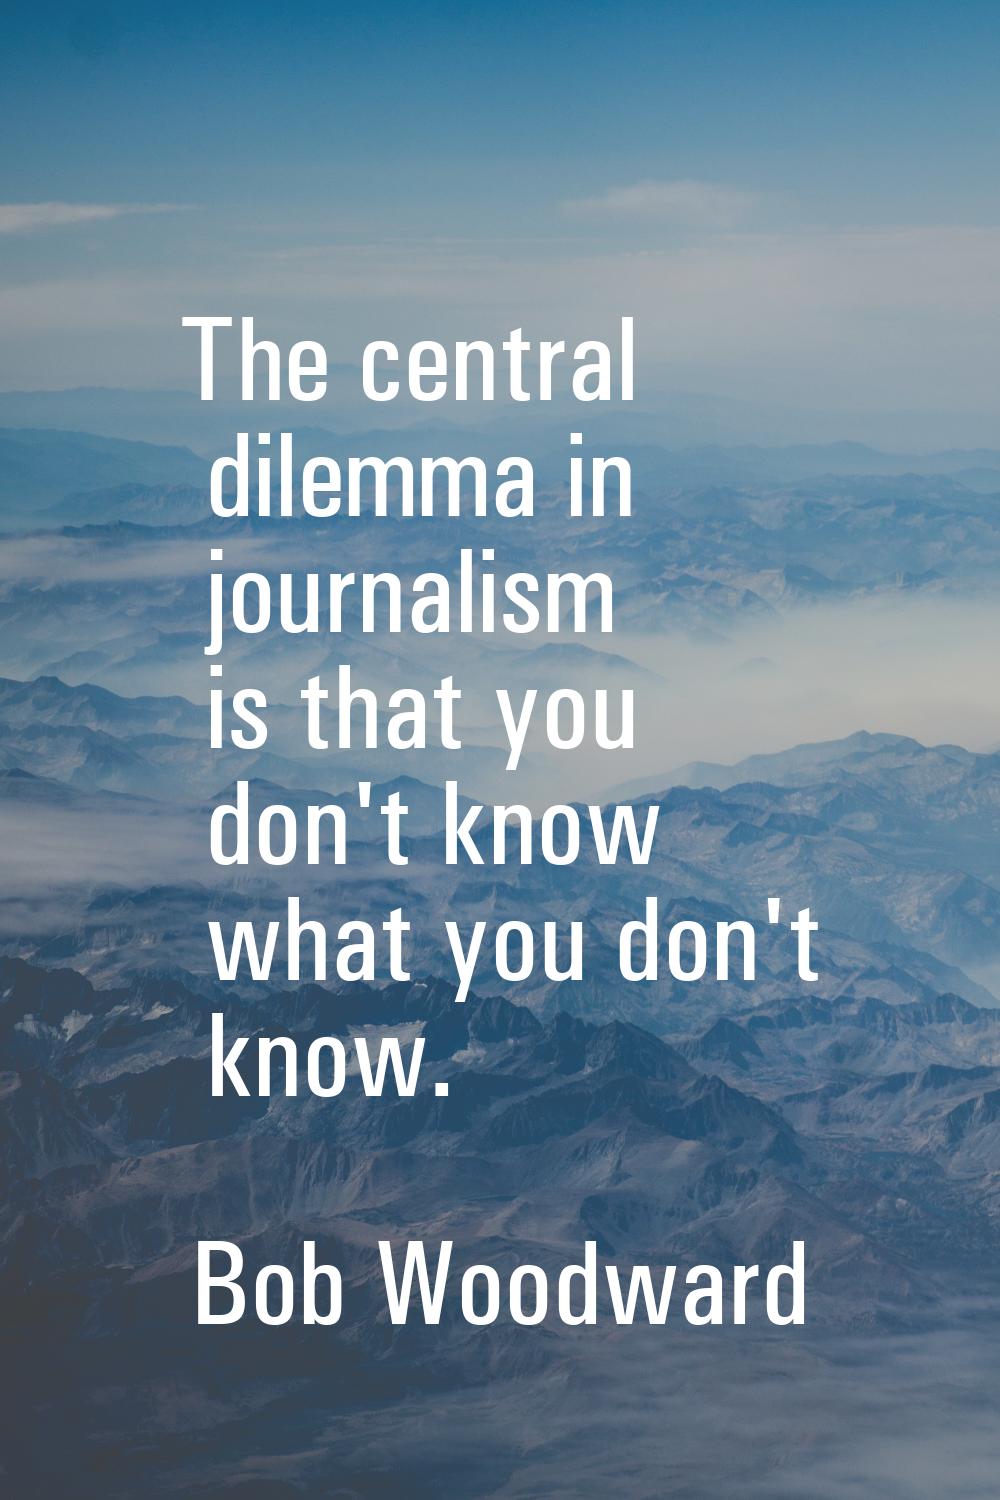 The central dilemma in journalism is that you don't know what you don't know.